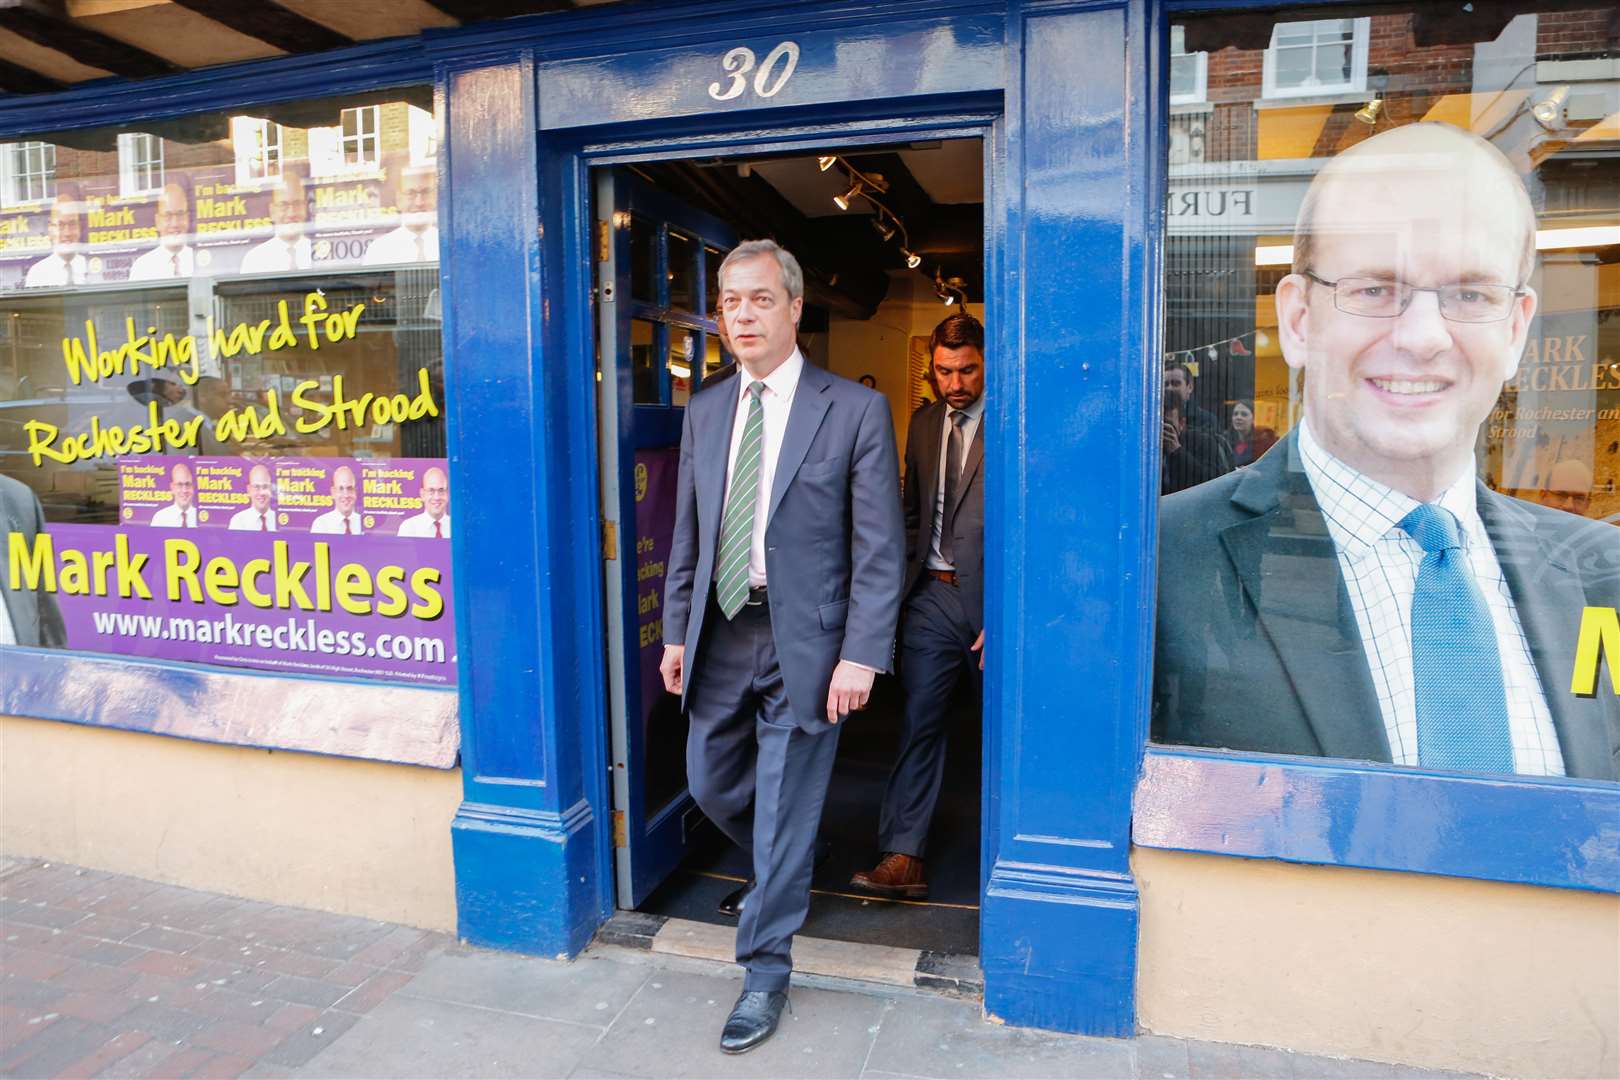 Nigel Farage at the Ukip "shop" in Rochester High Street